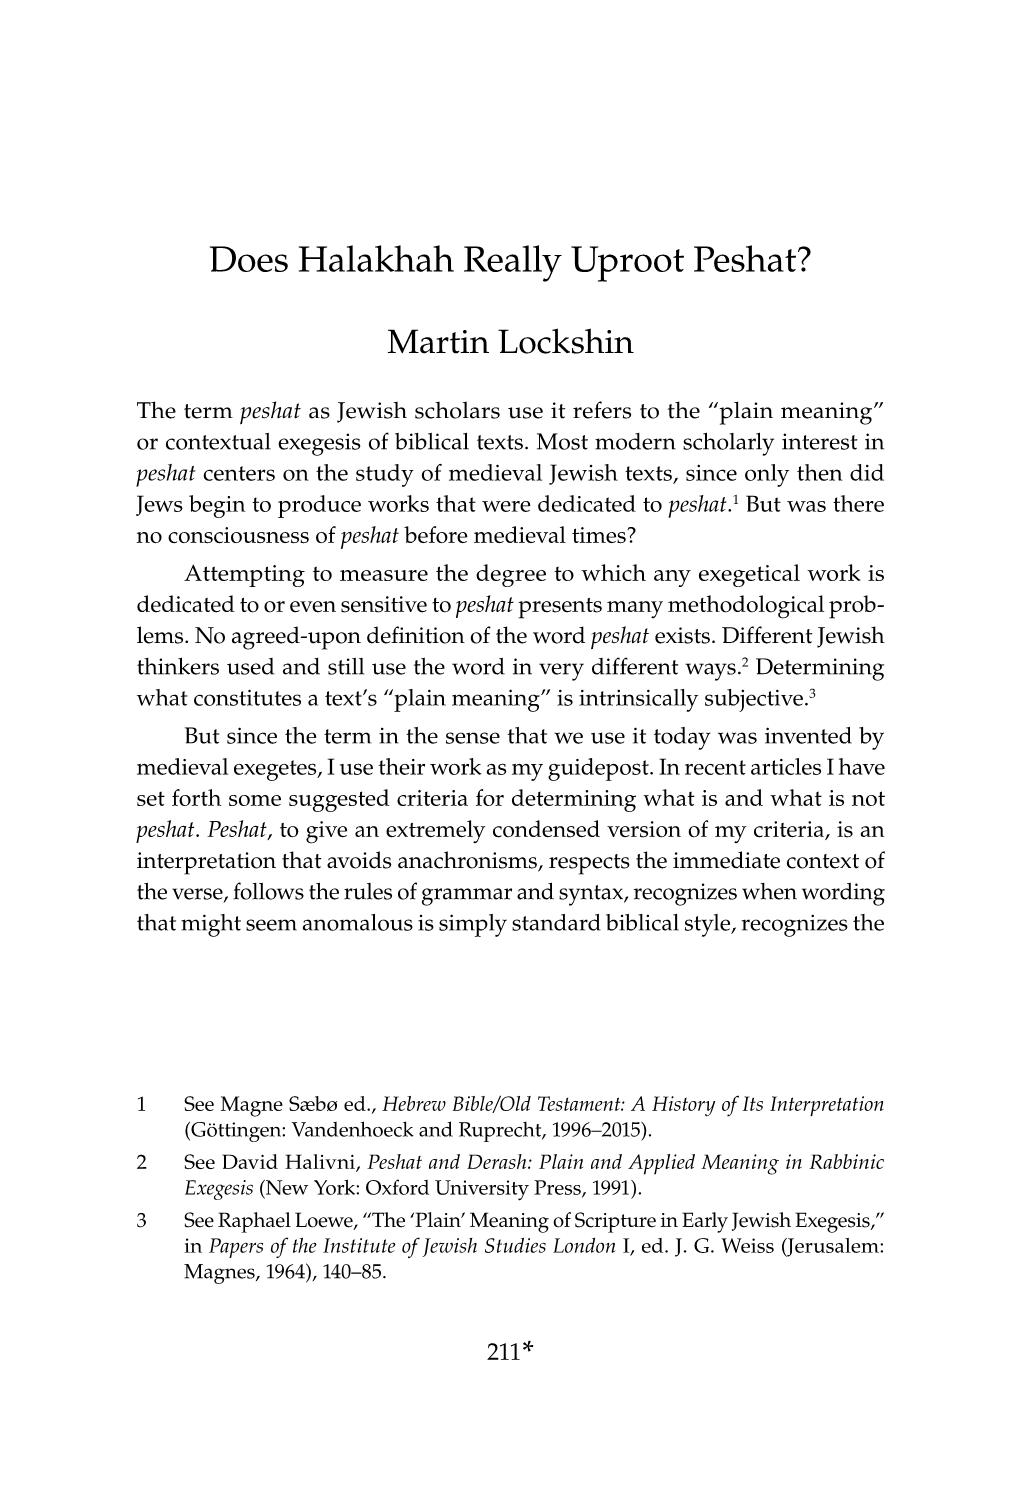 Does Halakhah Really Uproot Peshat?